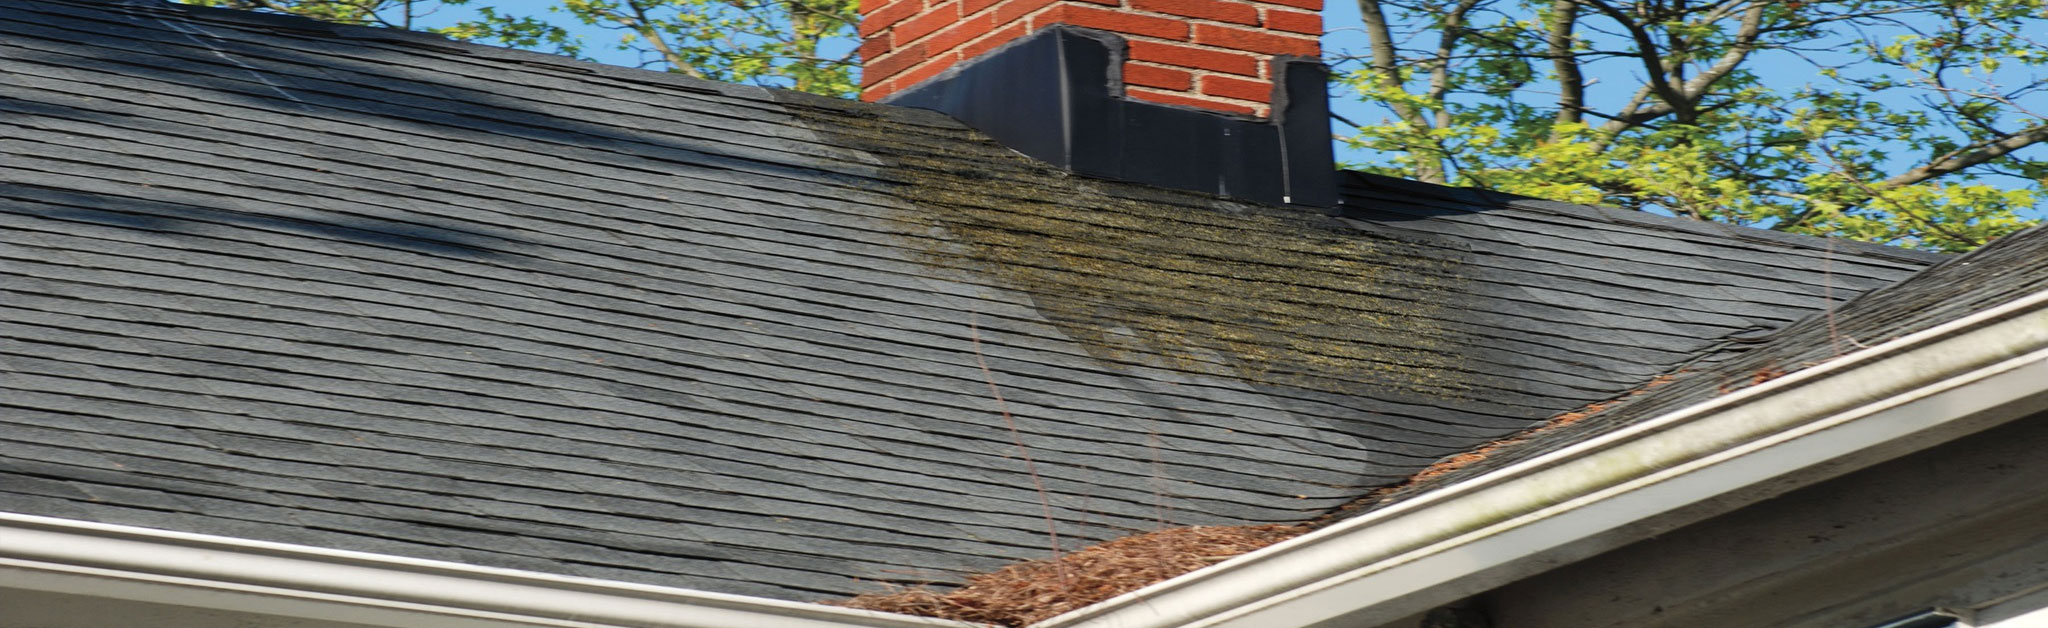 Central Penn Roofing Images